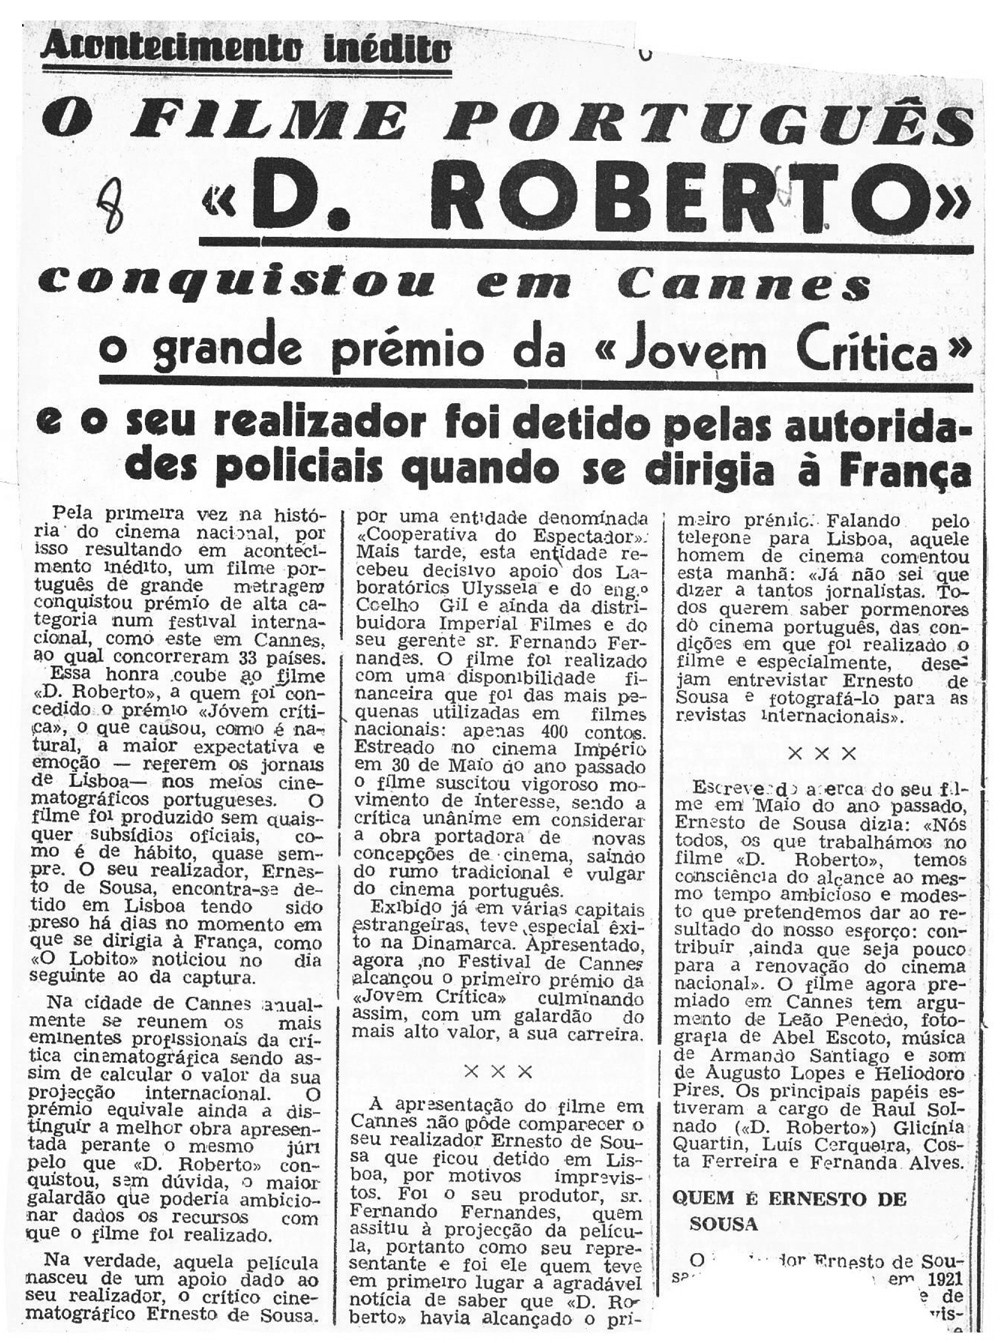  News clip about Dom Roberto's prize in Cannes and Ernesto de Sousa's imprisonment, 1963. 